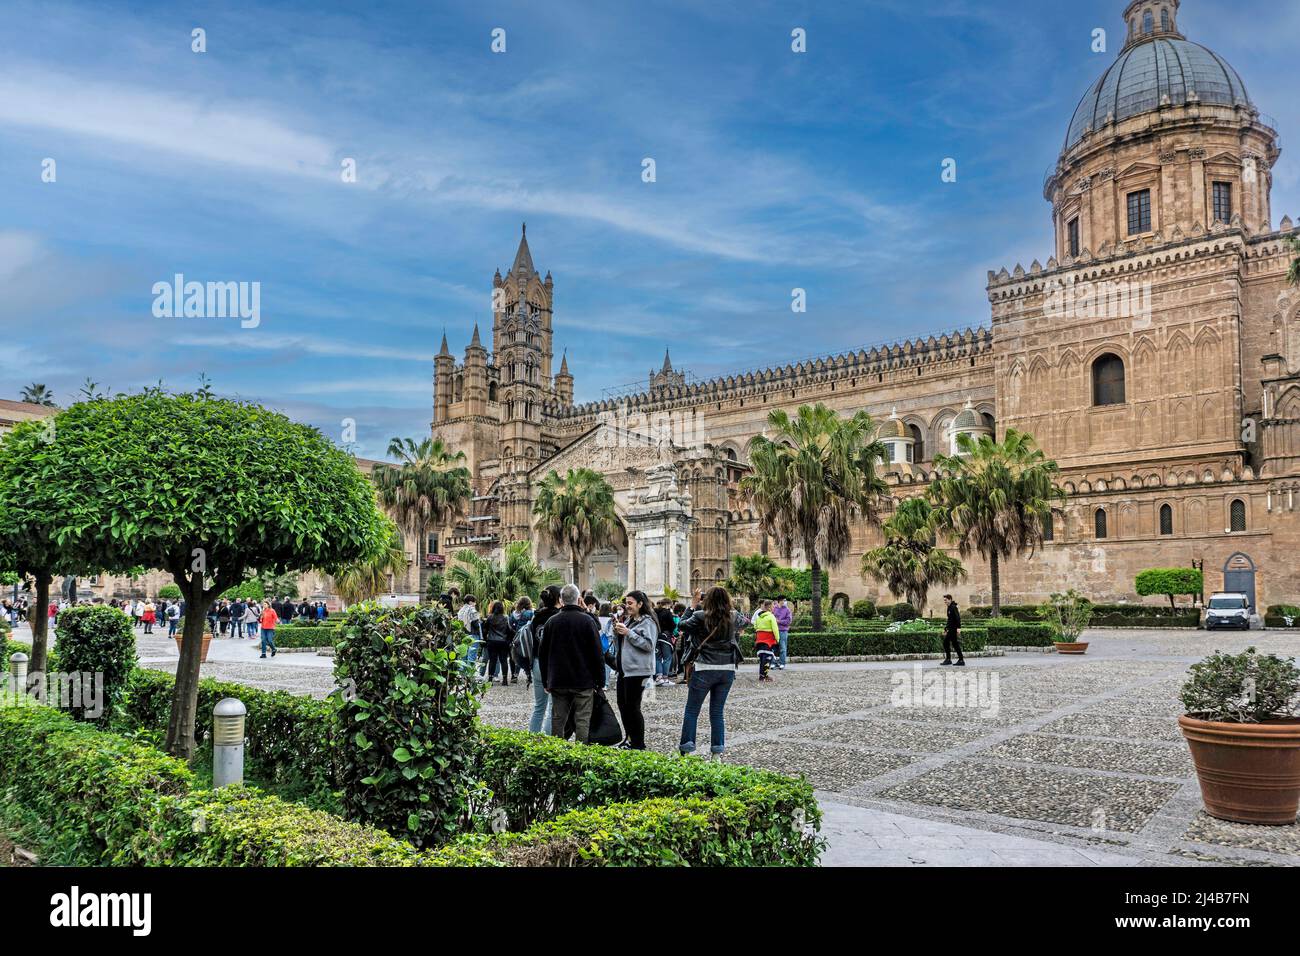 Crowds of sightseers in the grounds of Palermo Cathedral in Sicily, Italy. Stock Photo